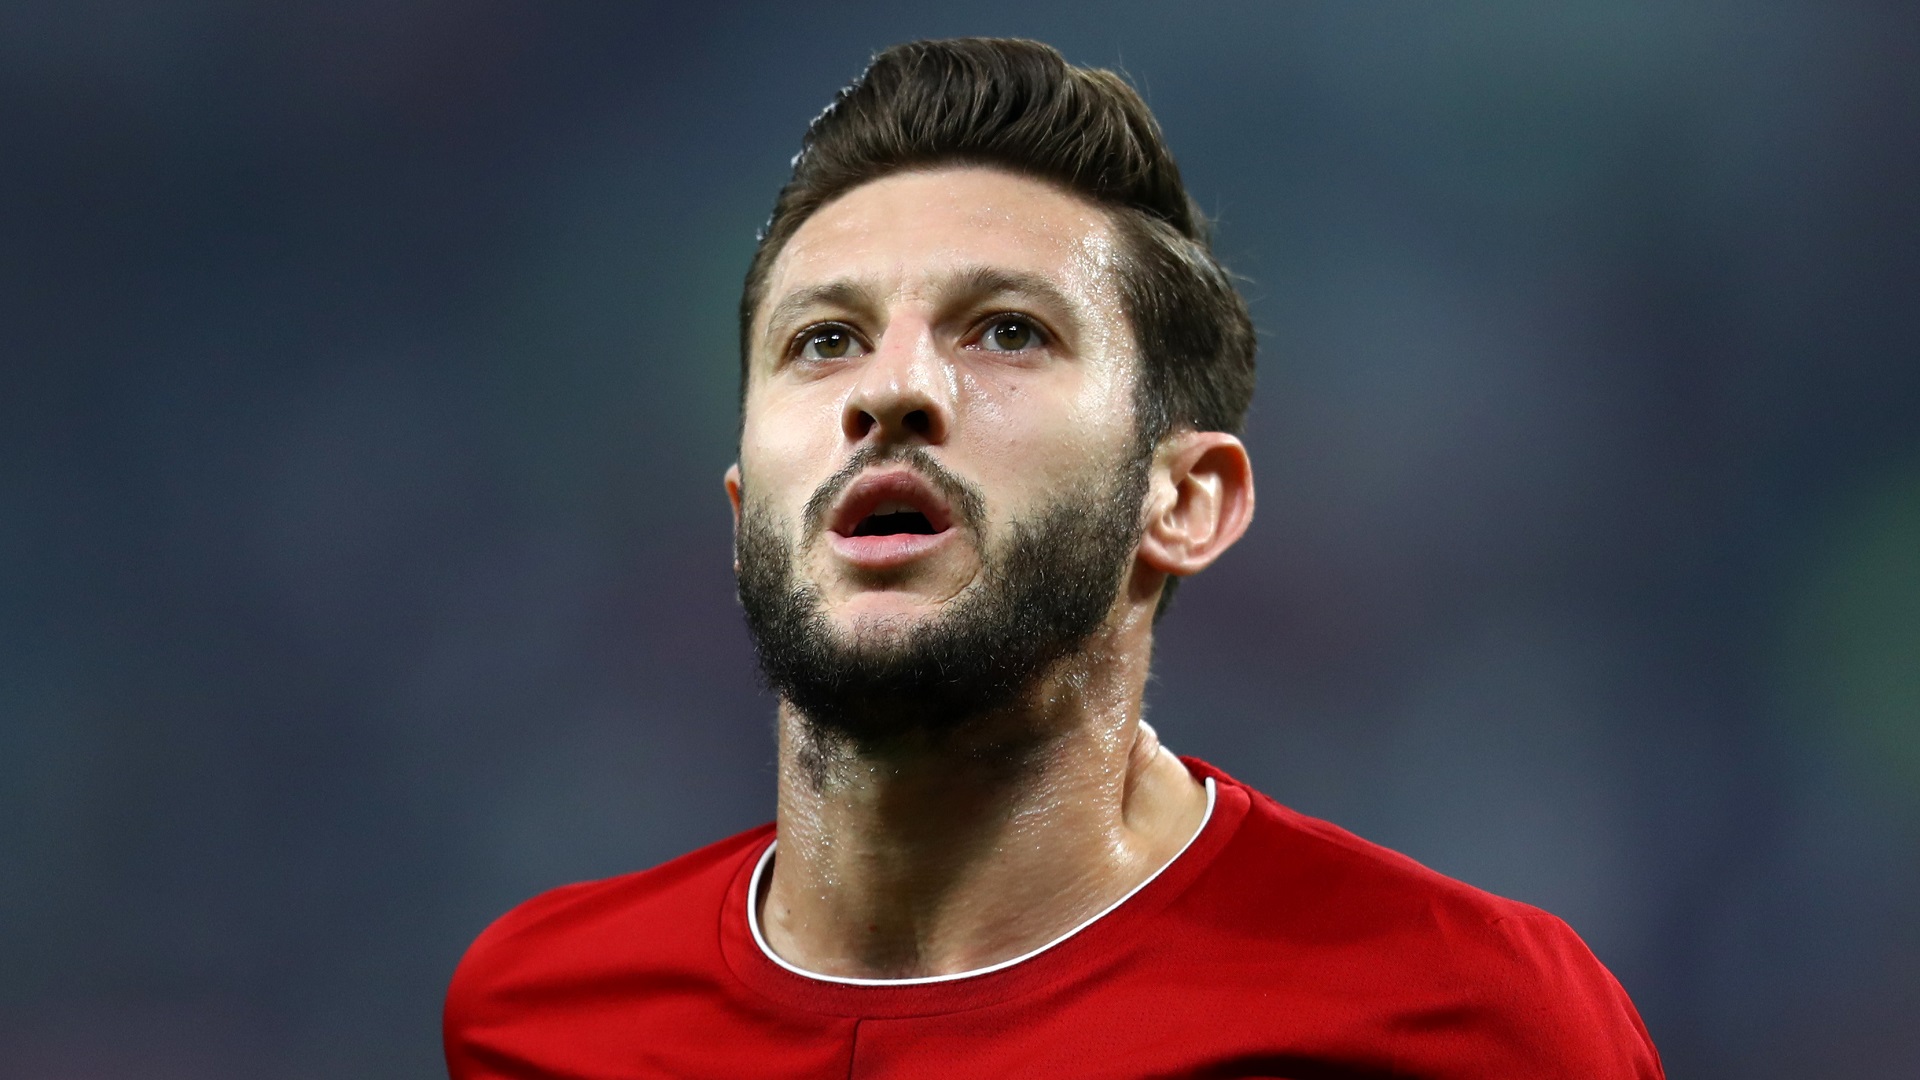 â€˜Free agent Lallana can be special with Maddisonâ€™ â€“ Liverpool star should head to Leicester, says Hammond